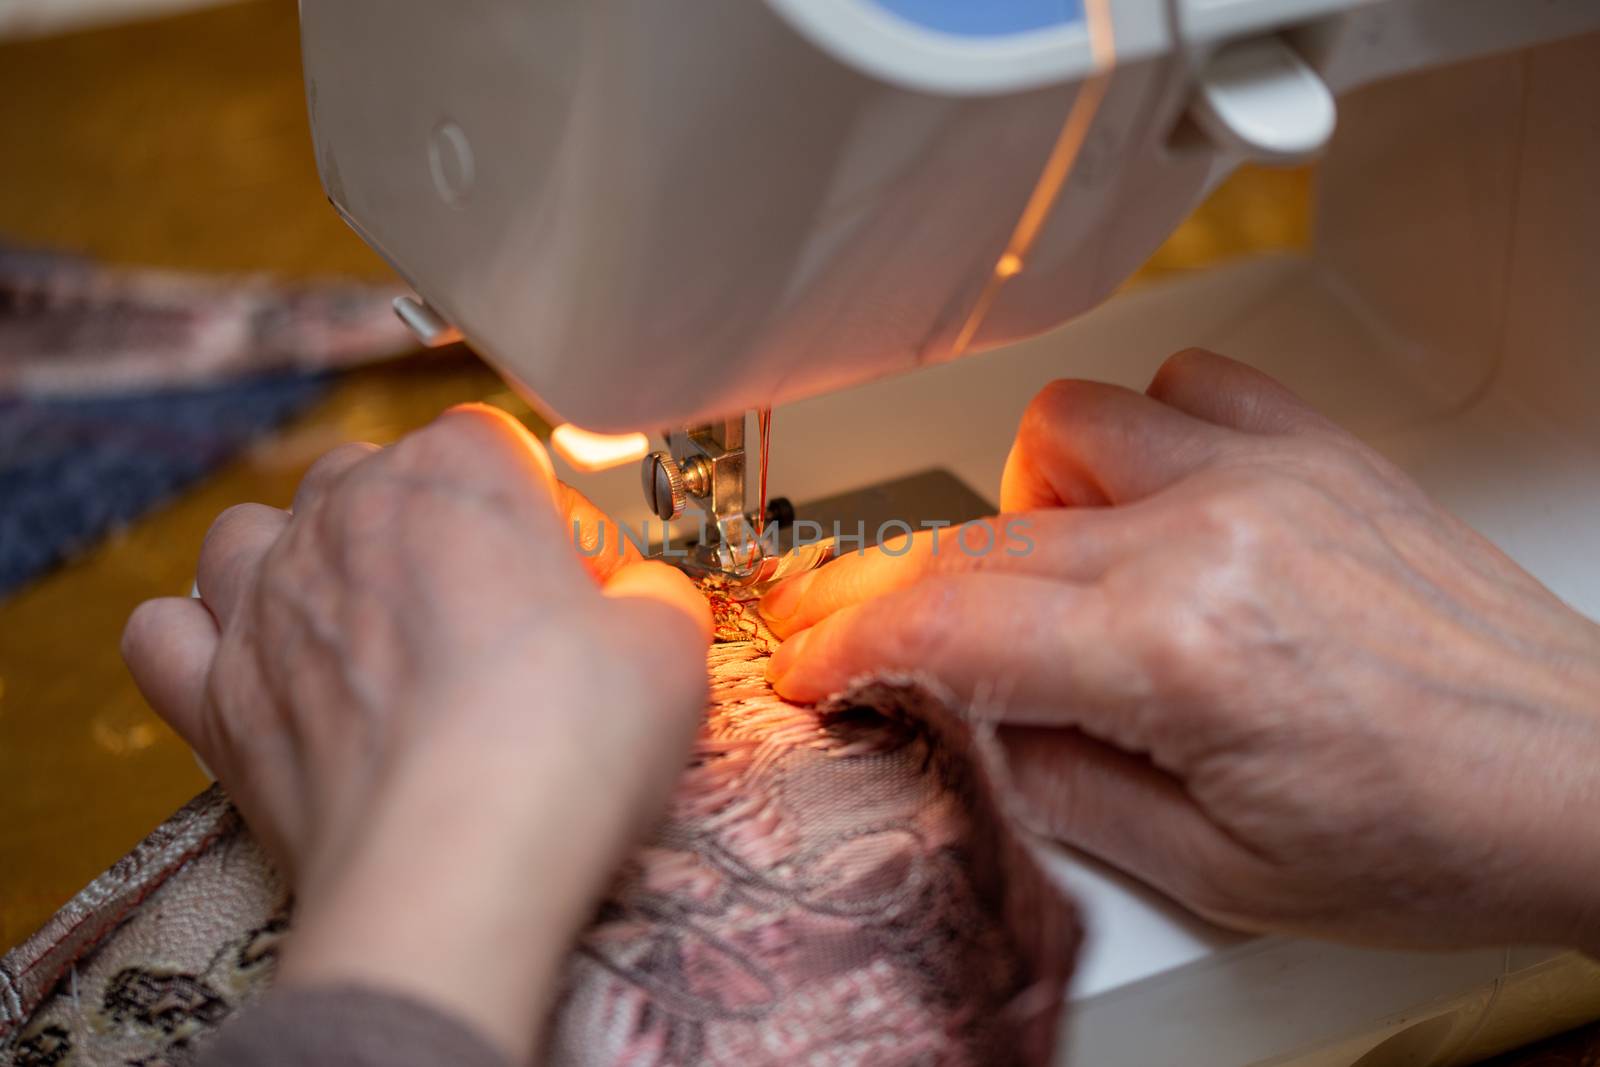 a close-up view of sewing process, hand of old woman using sewing machine, selective focus technique.